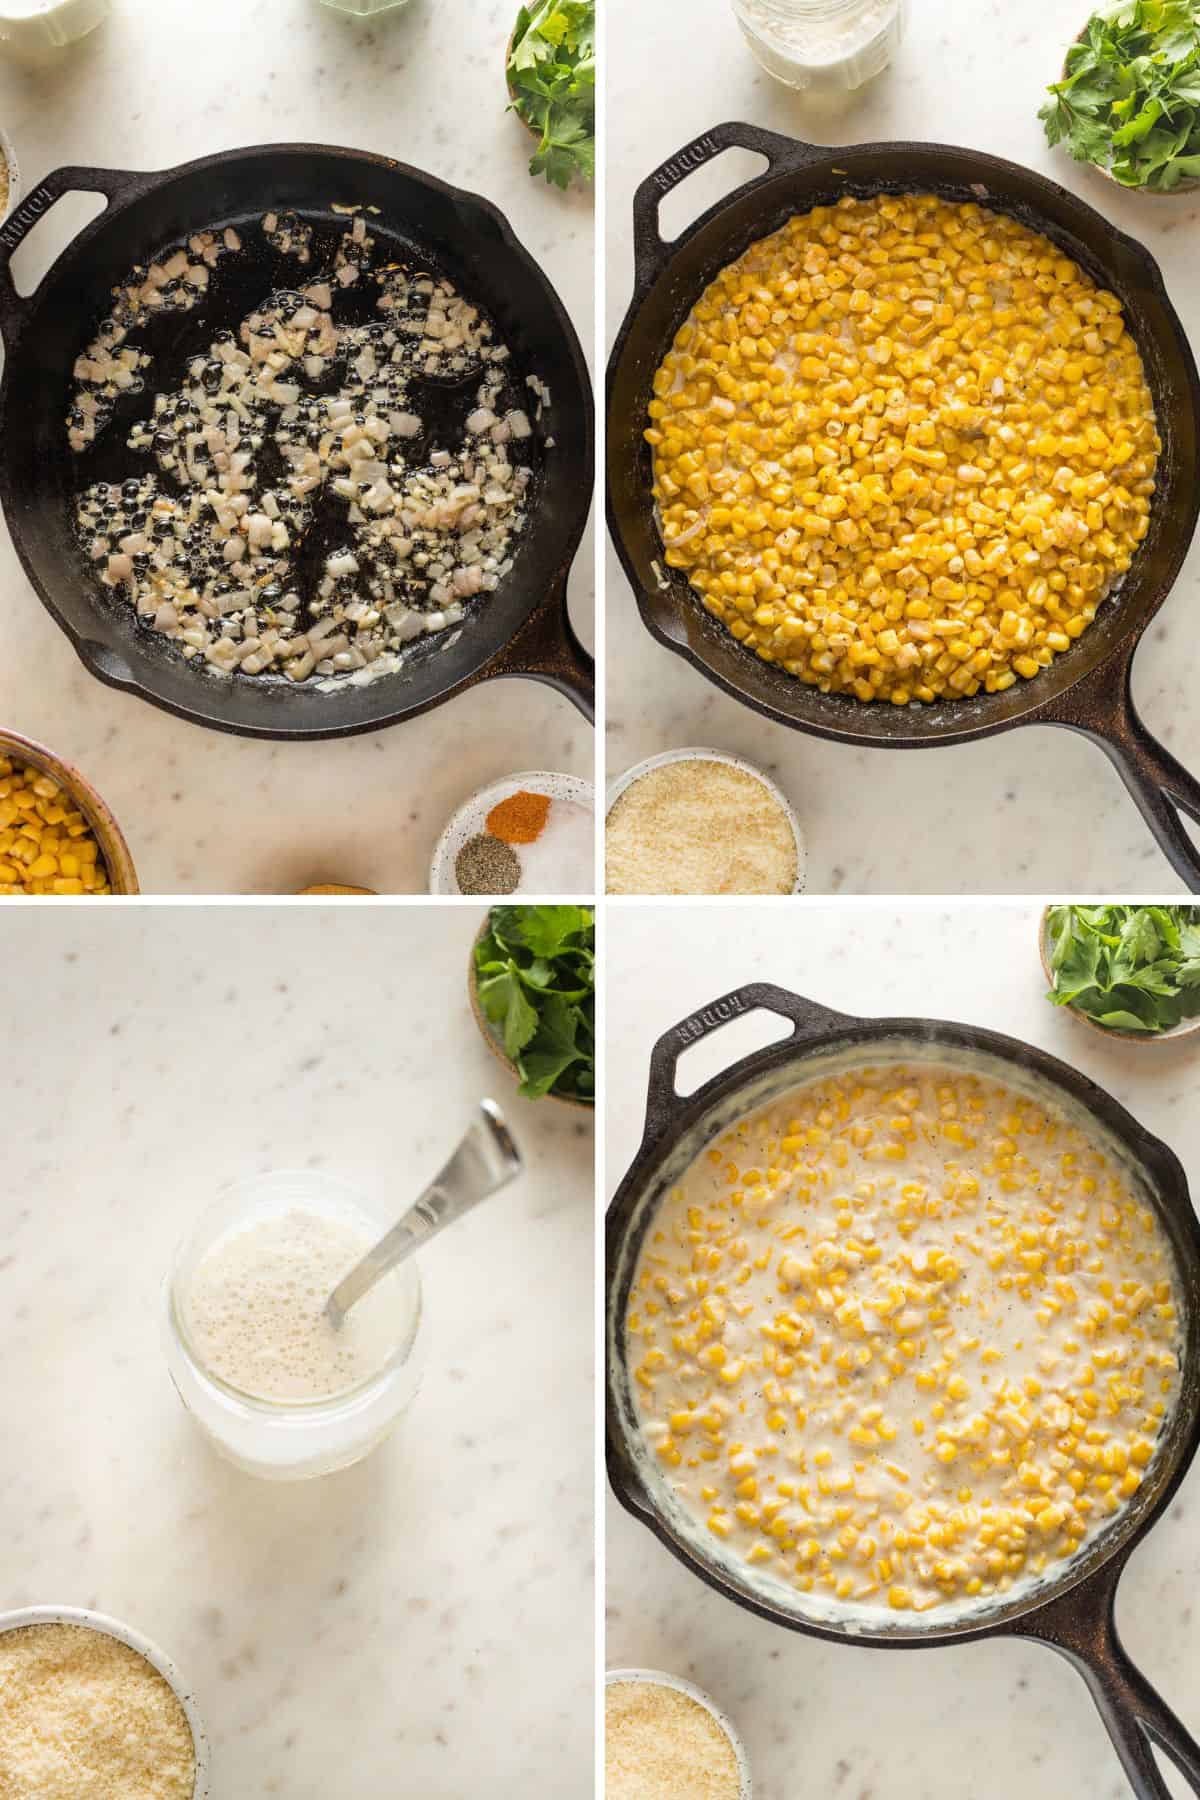 A collage of garlic and shallots being cooked in butter before corn was added along with seasonings and a slurry being made and poured into corn to thicken